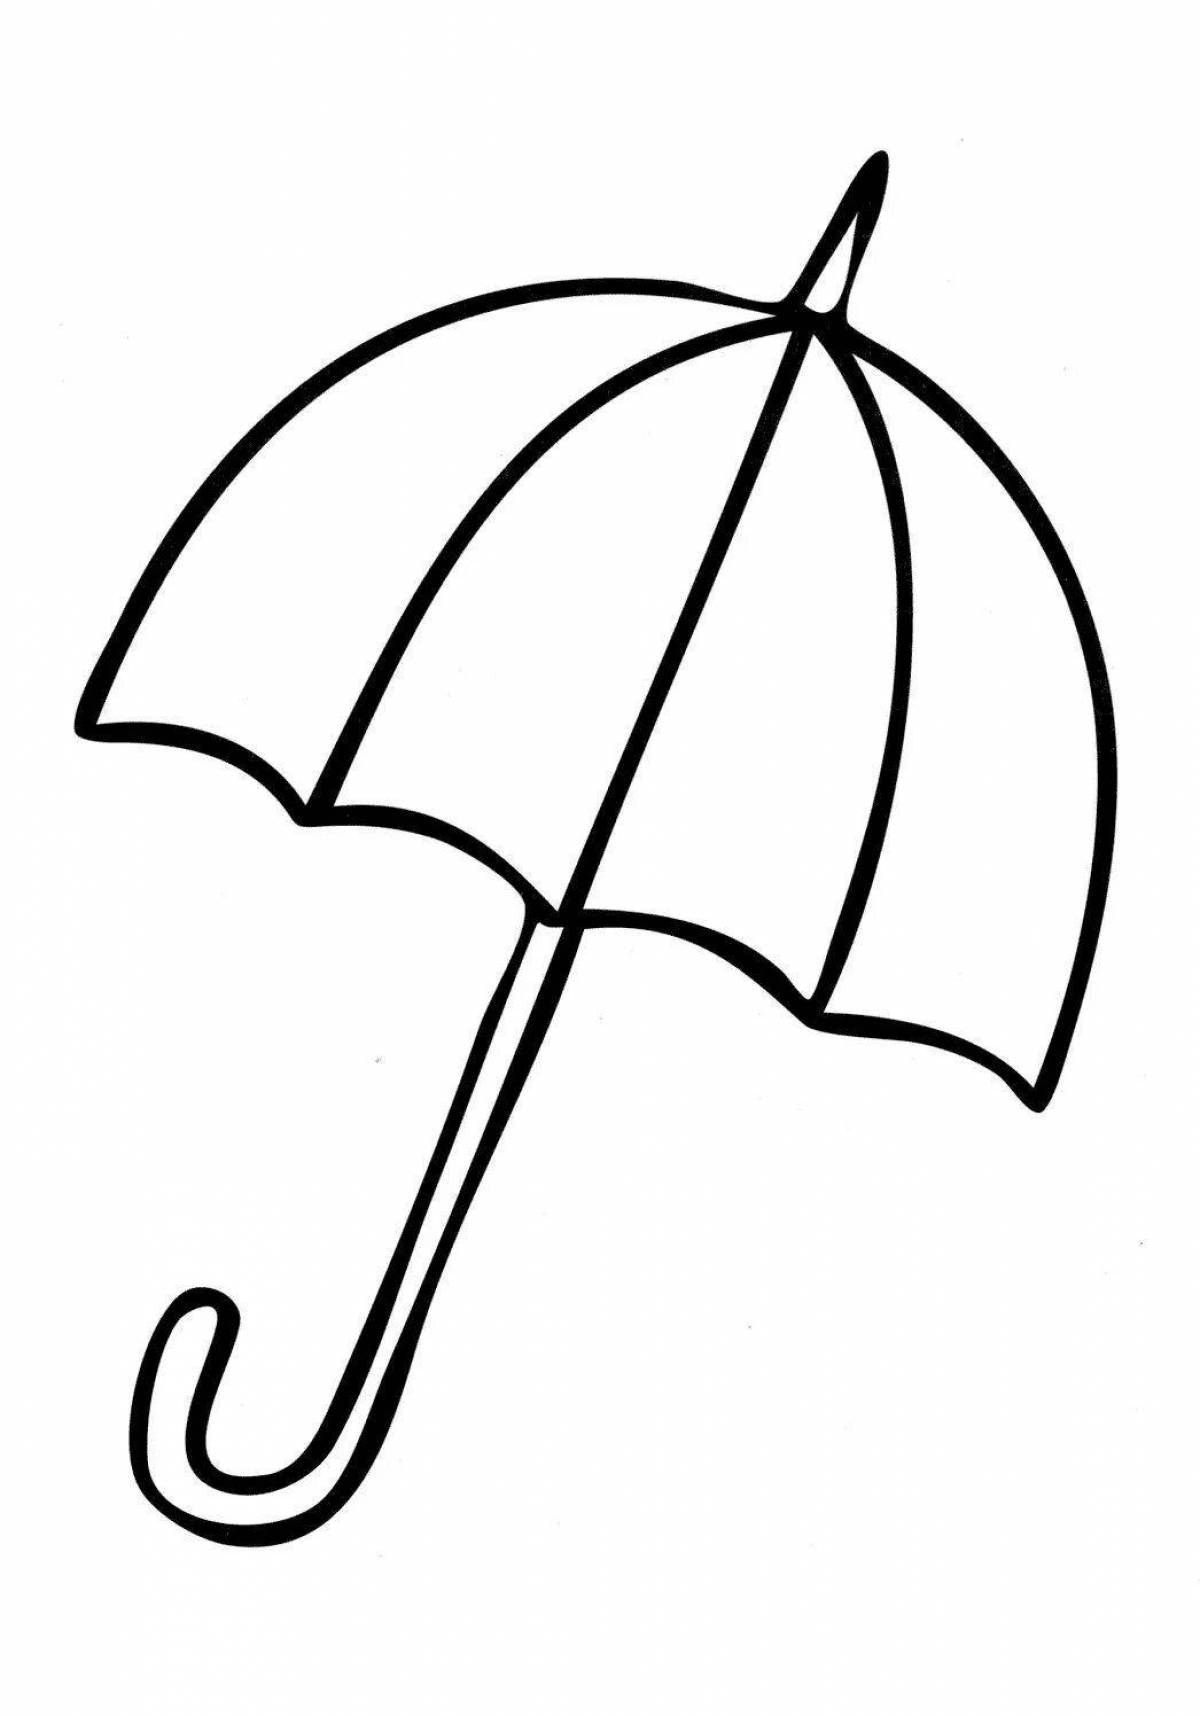 Playful umbrella coloring page for kids